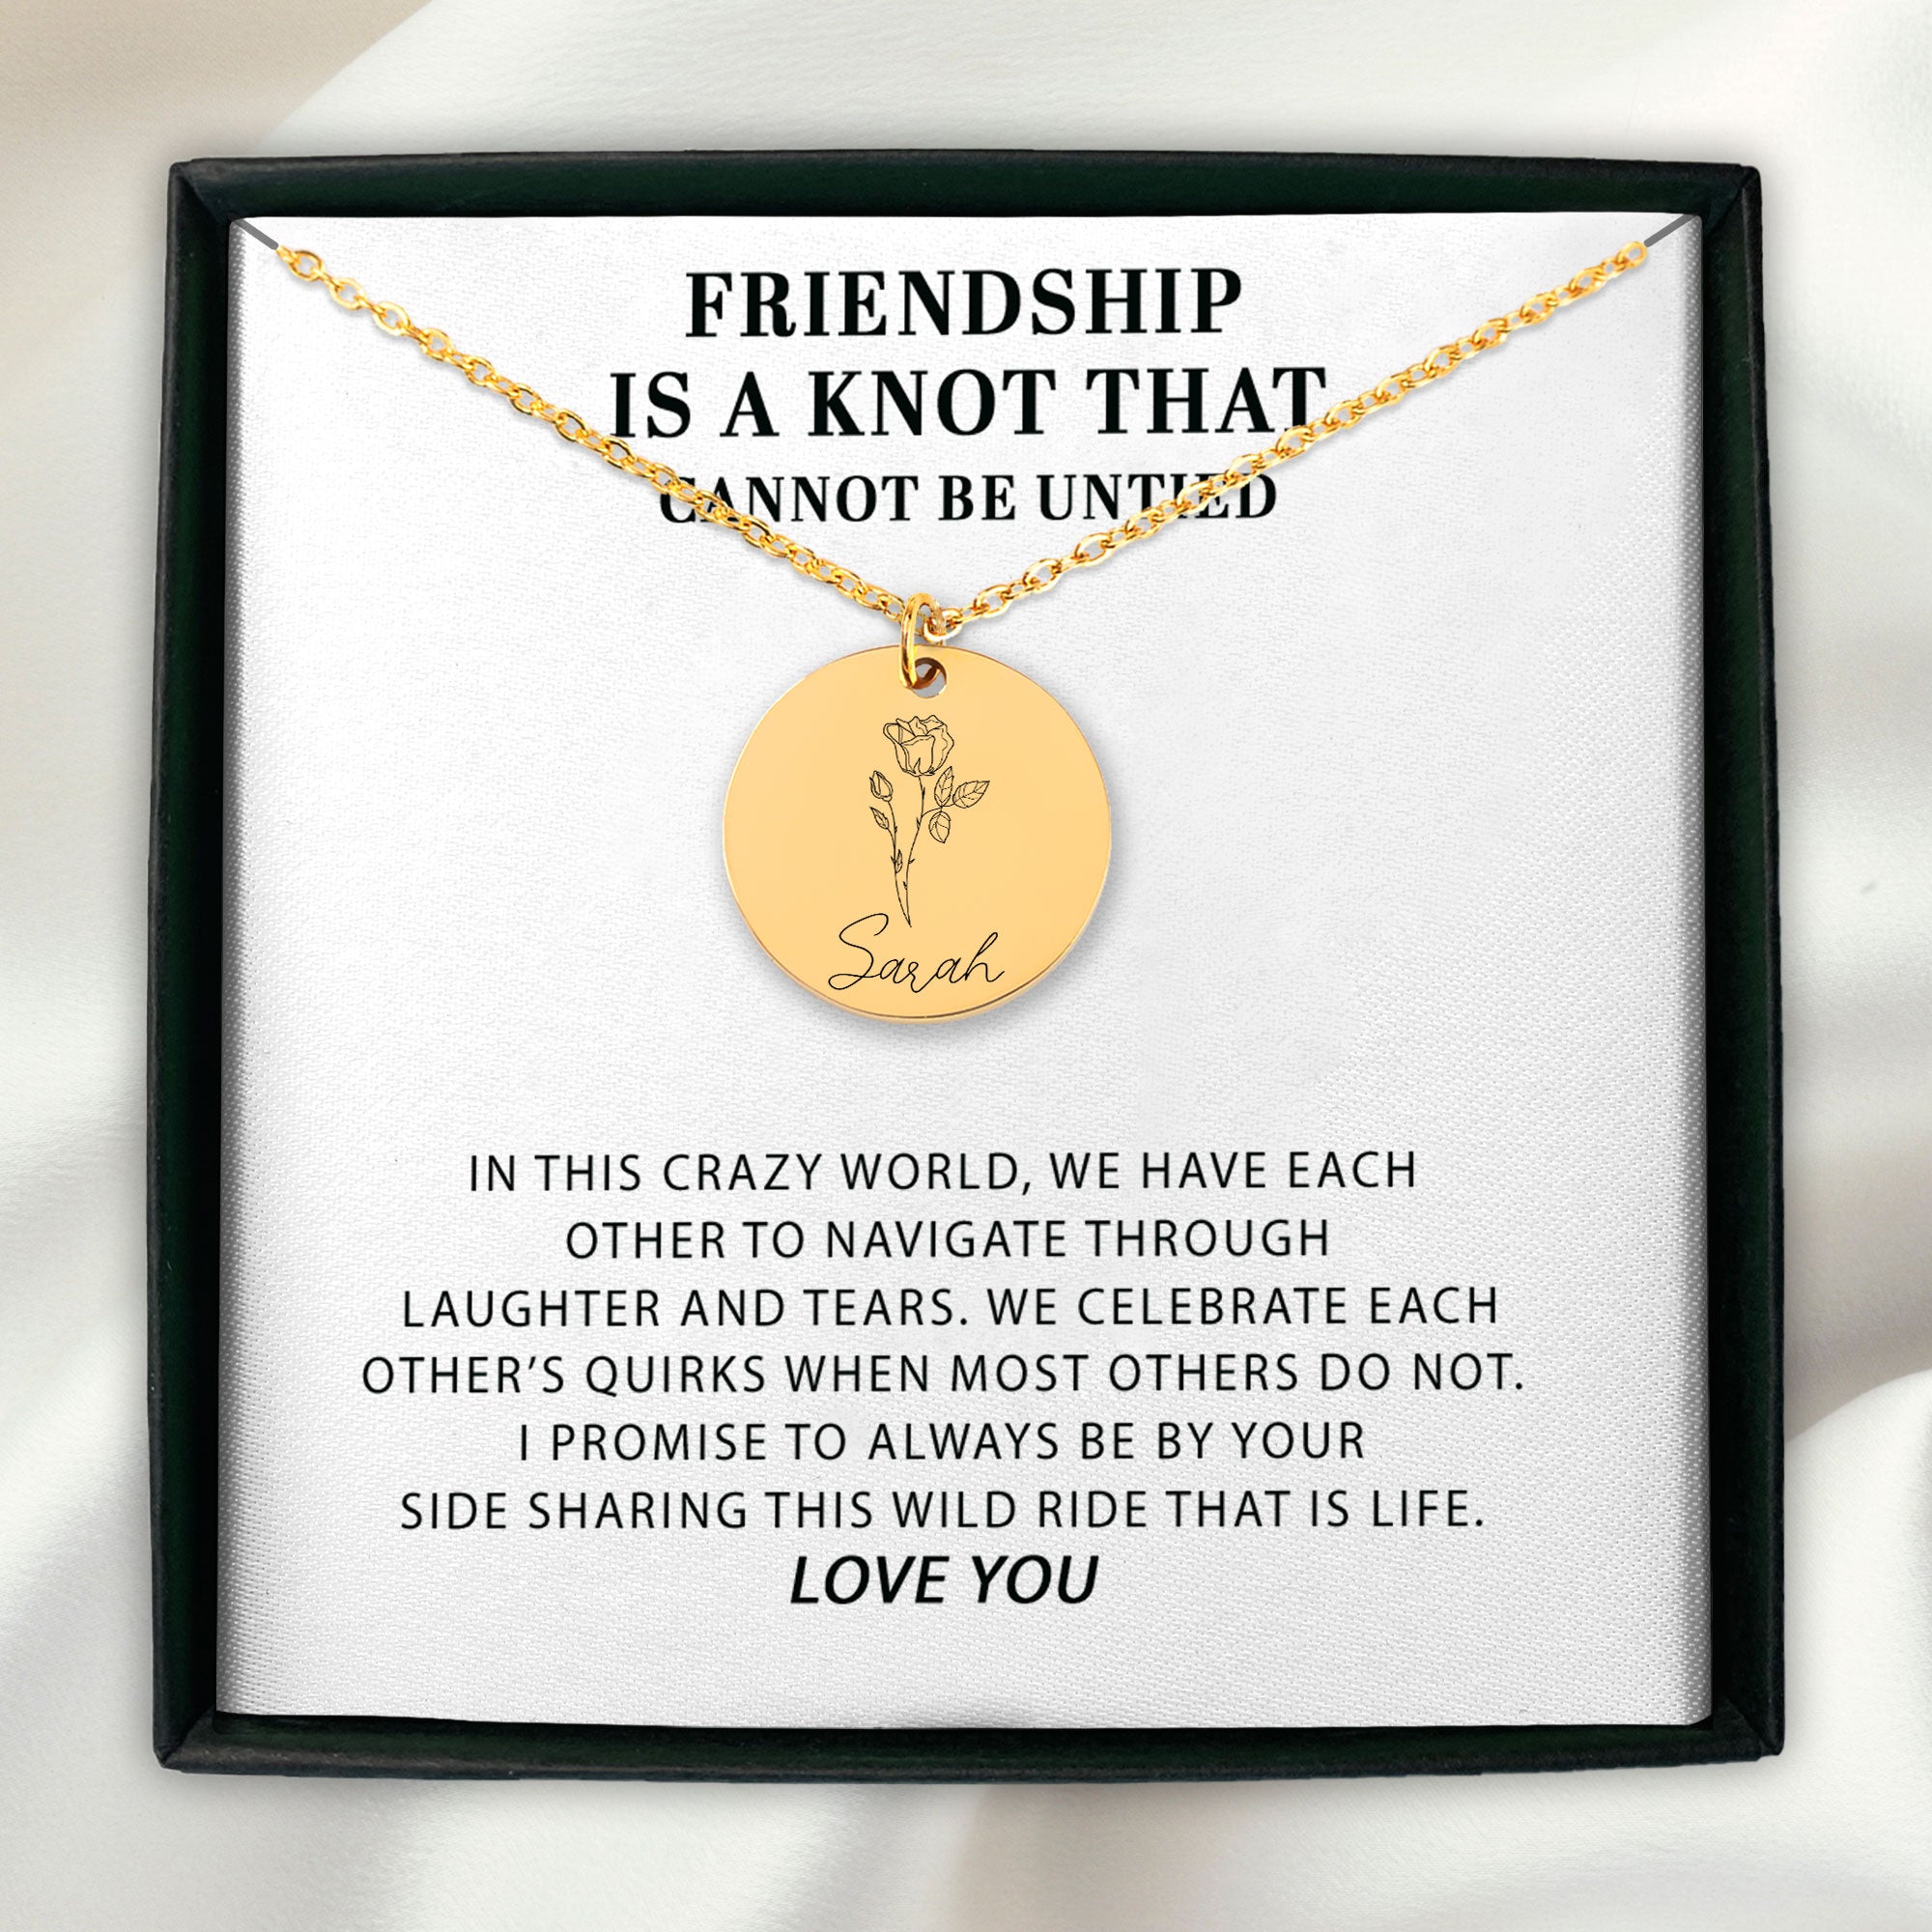 Friendship Is A Knot That Cannot Be Untied Personalized Friendship Birth Flower Necklace | Soul Sister Gift | Long Distance Friendship Jewelry | Best Friend Appreciation Gift